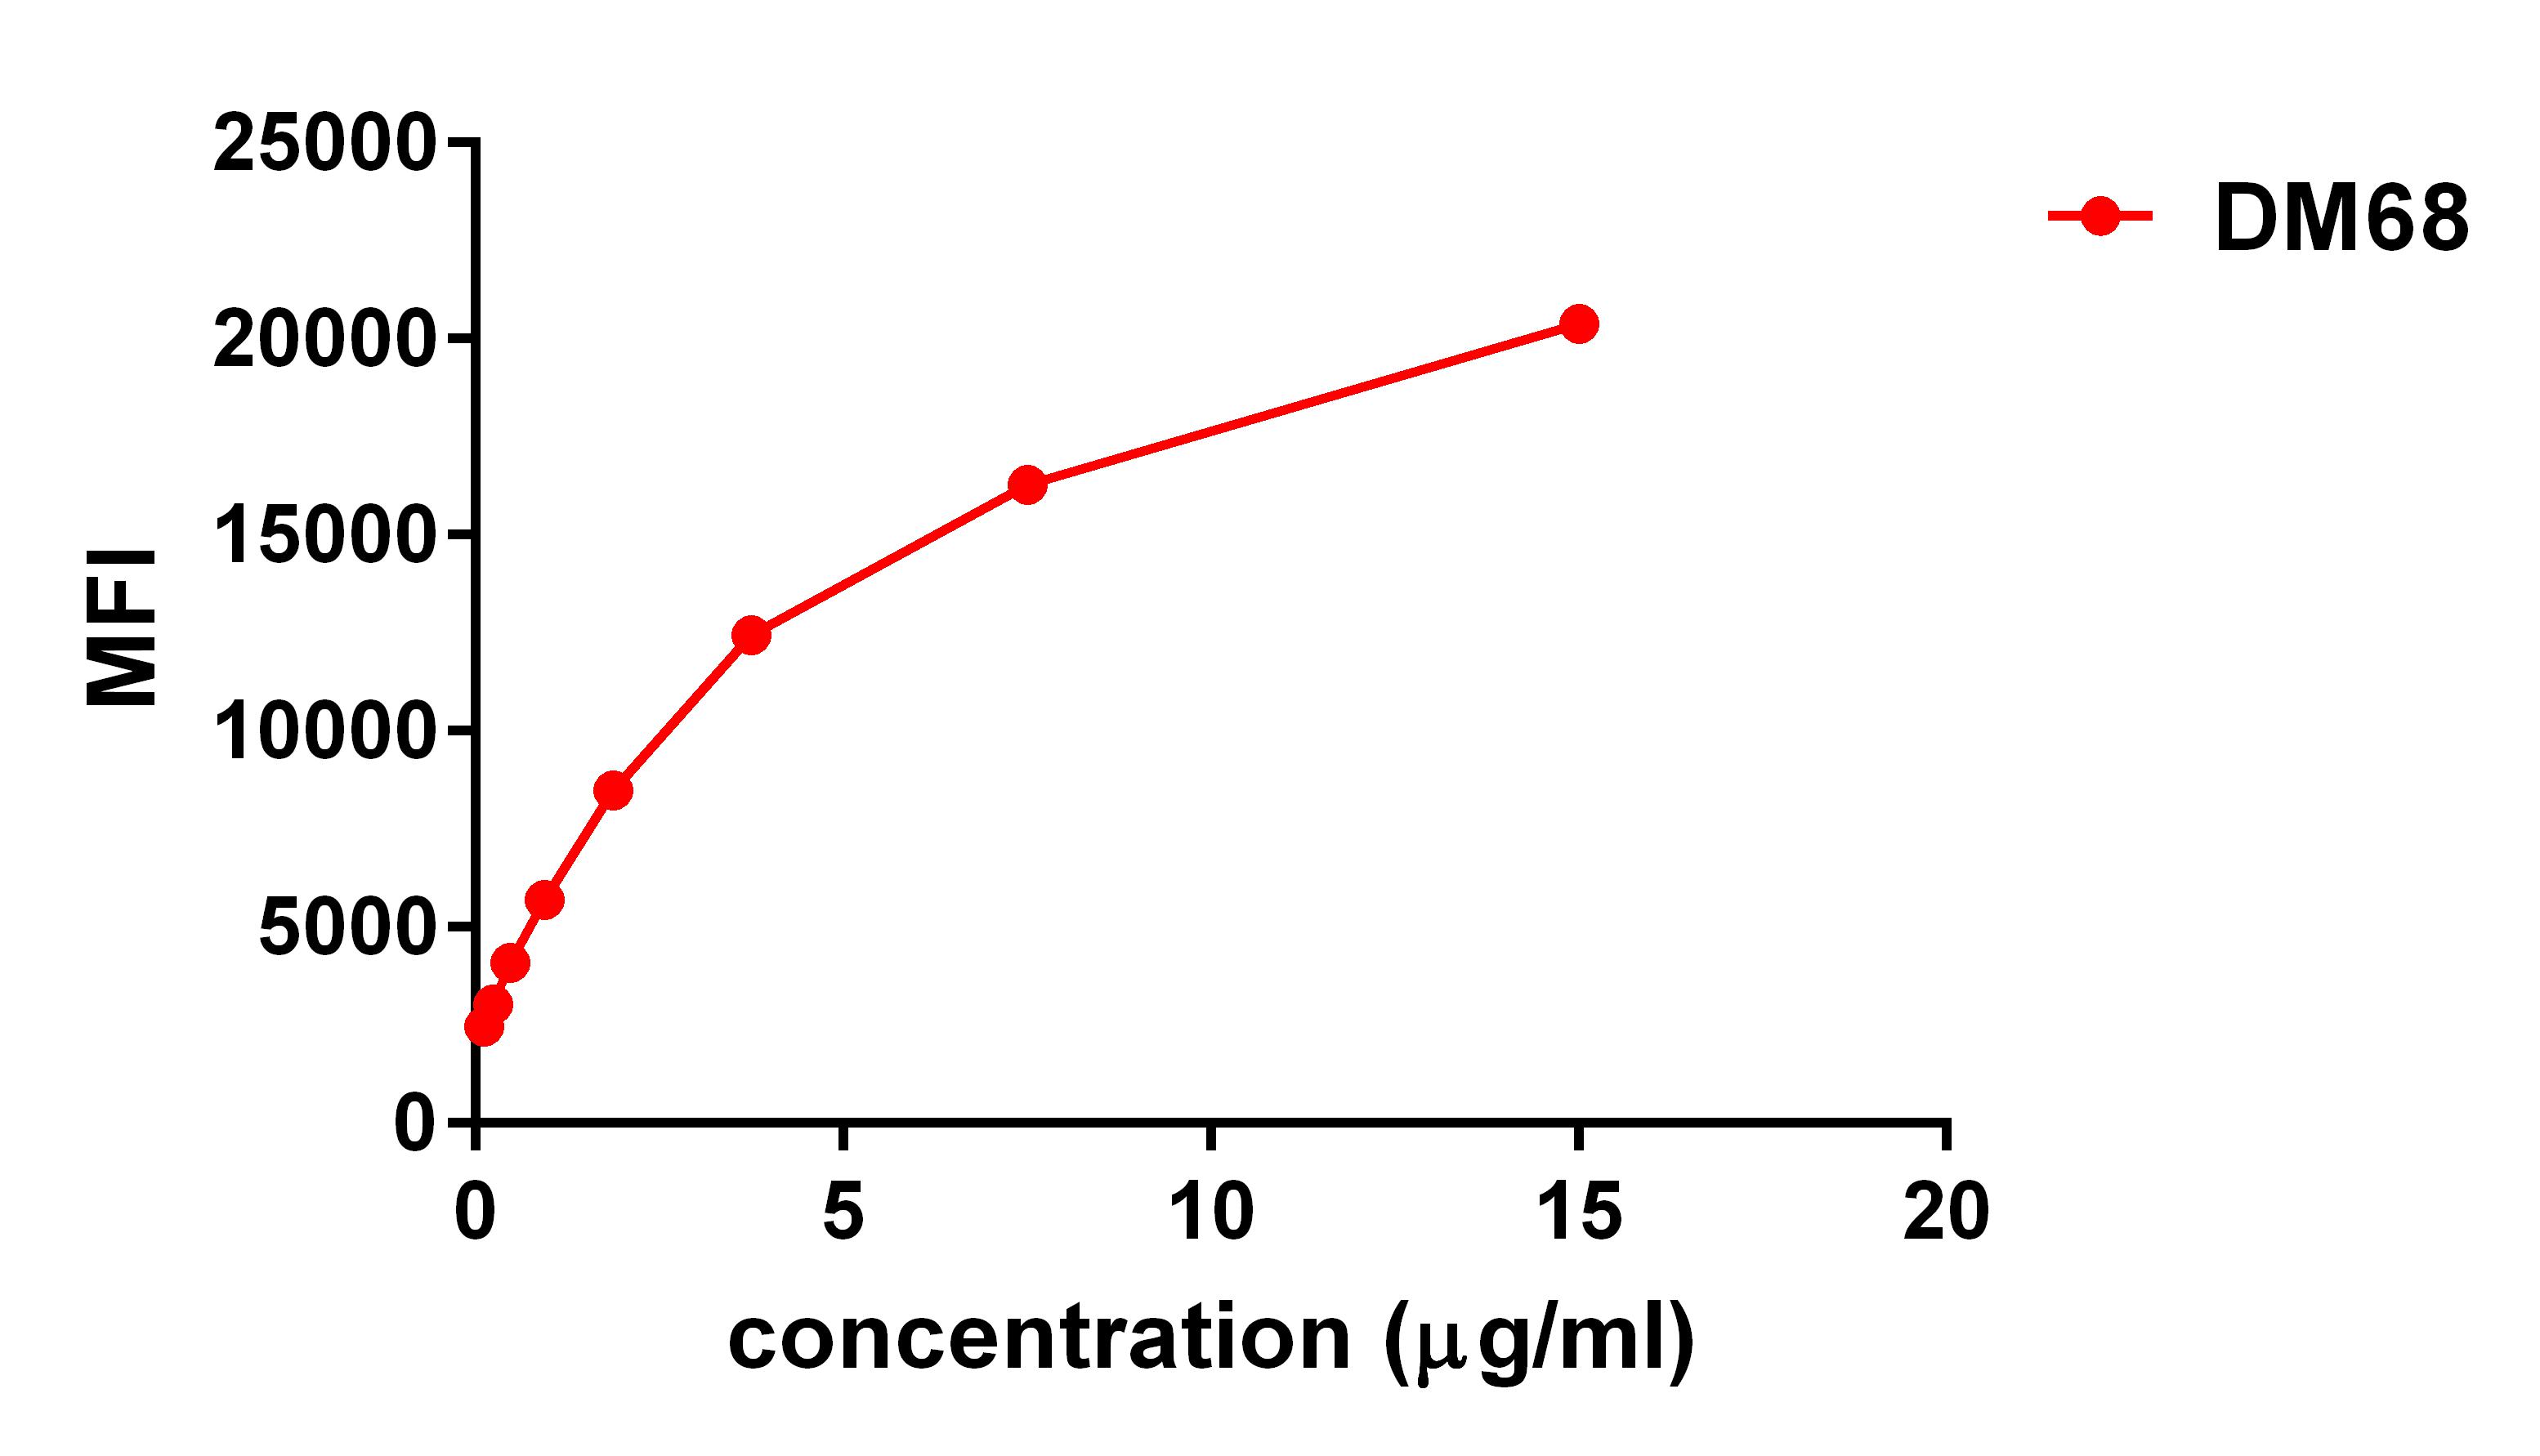 Figure 3. FACS data of serially titrated Rabbit anti-4-1BB Ligand monoclonal antibody (clone: DM68) on Raji cells. The Y-axis represents the mean fluorescence intensity (MFI) while the X-axis represents the concentration of IgG used.